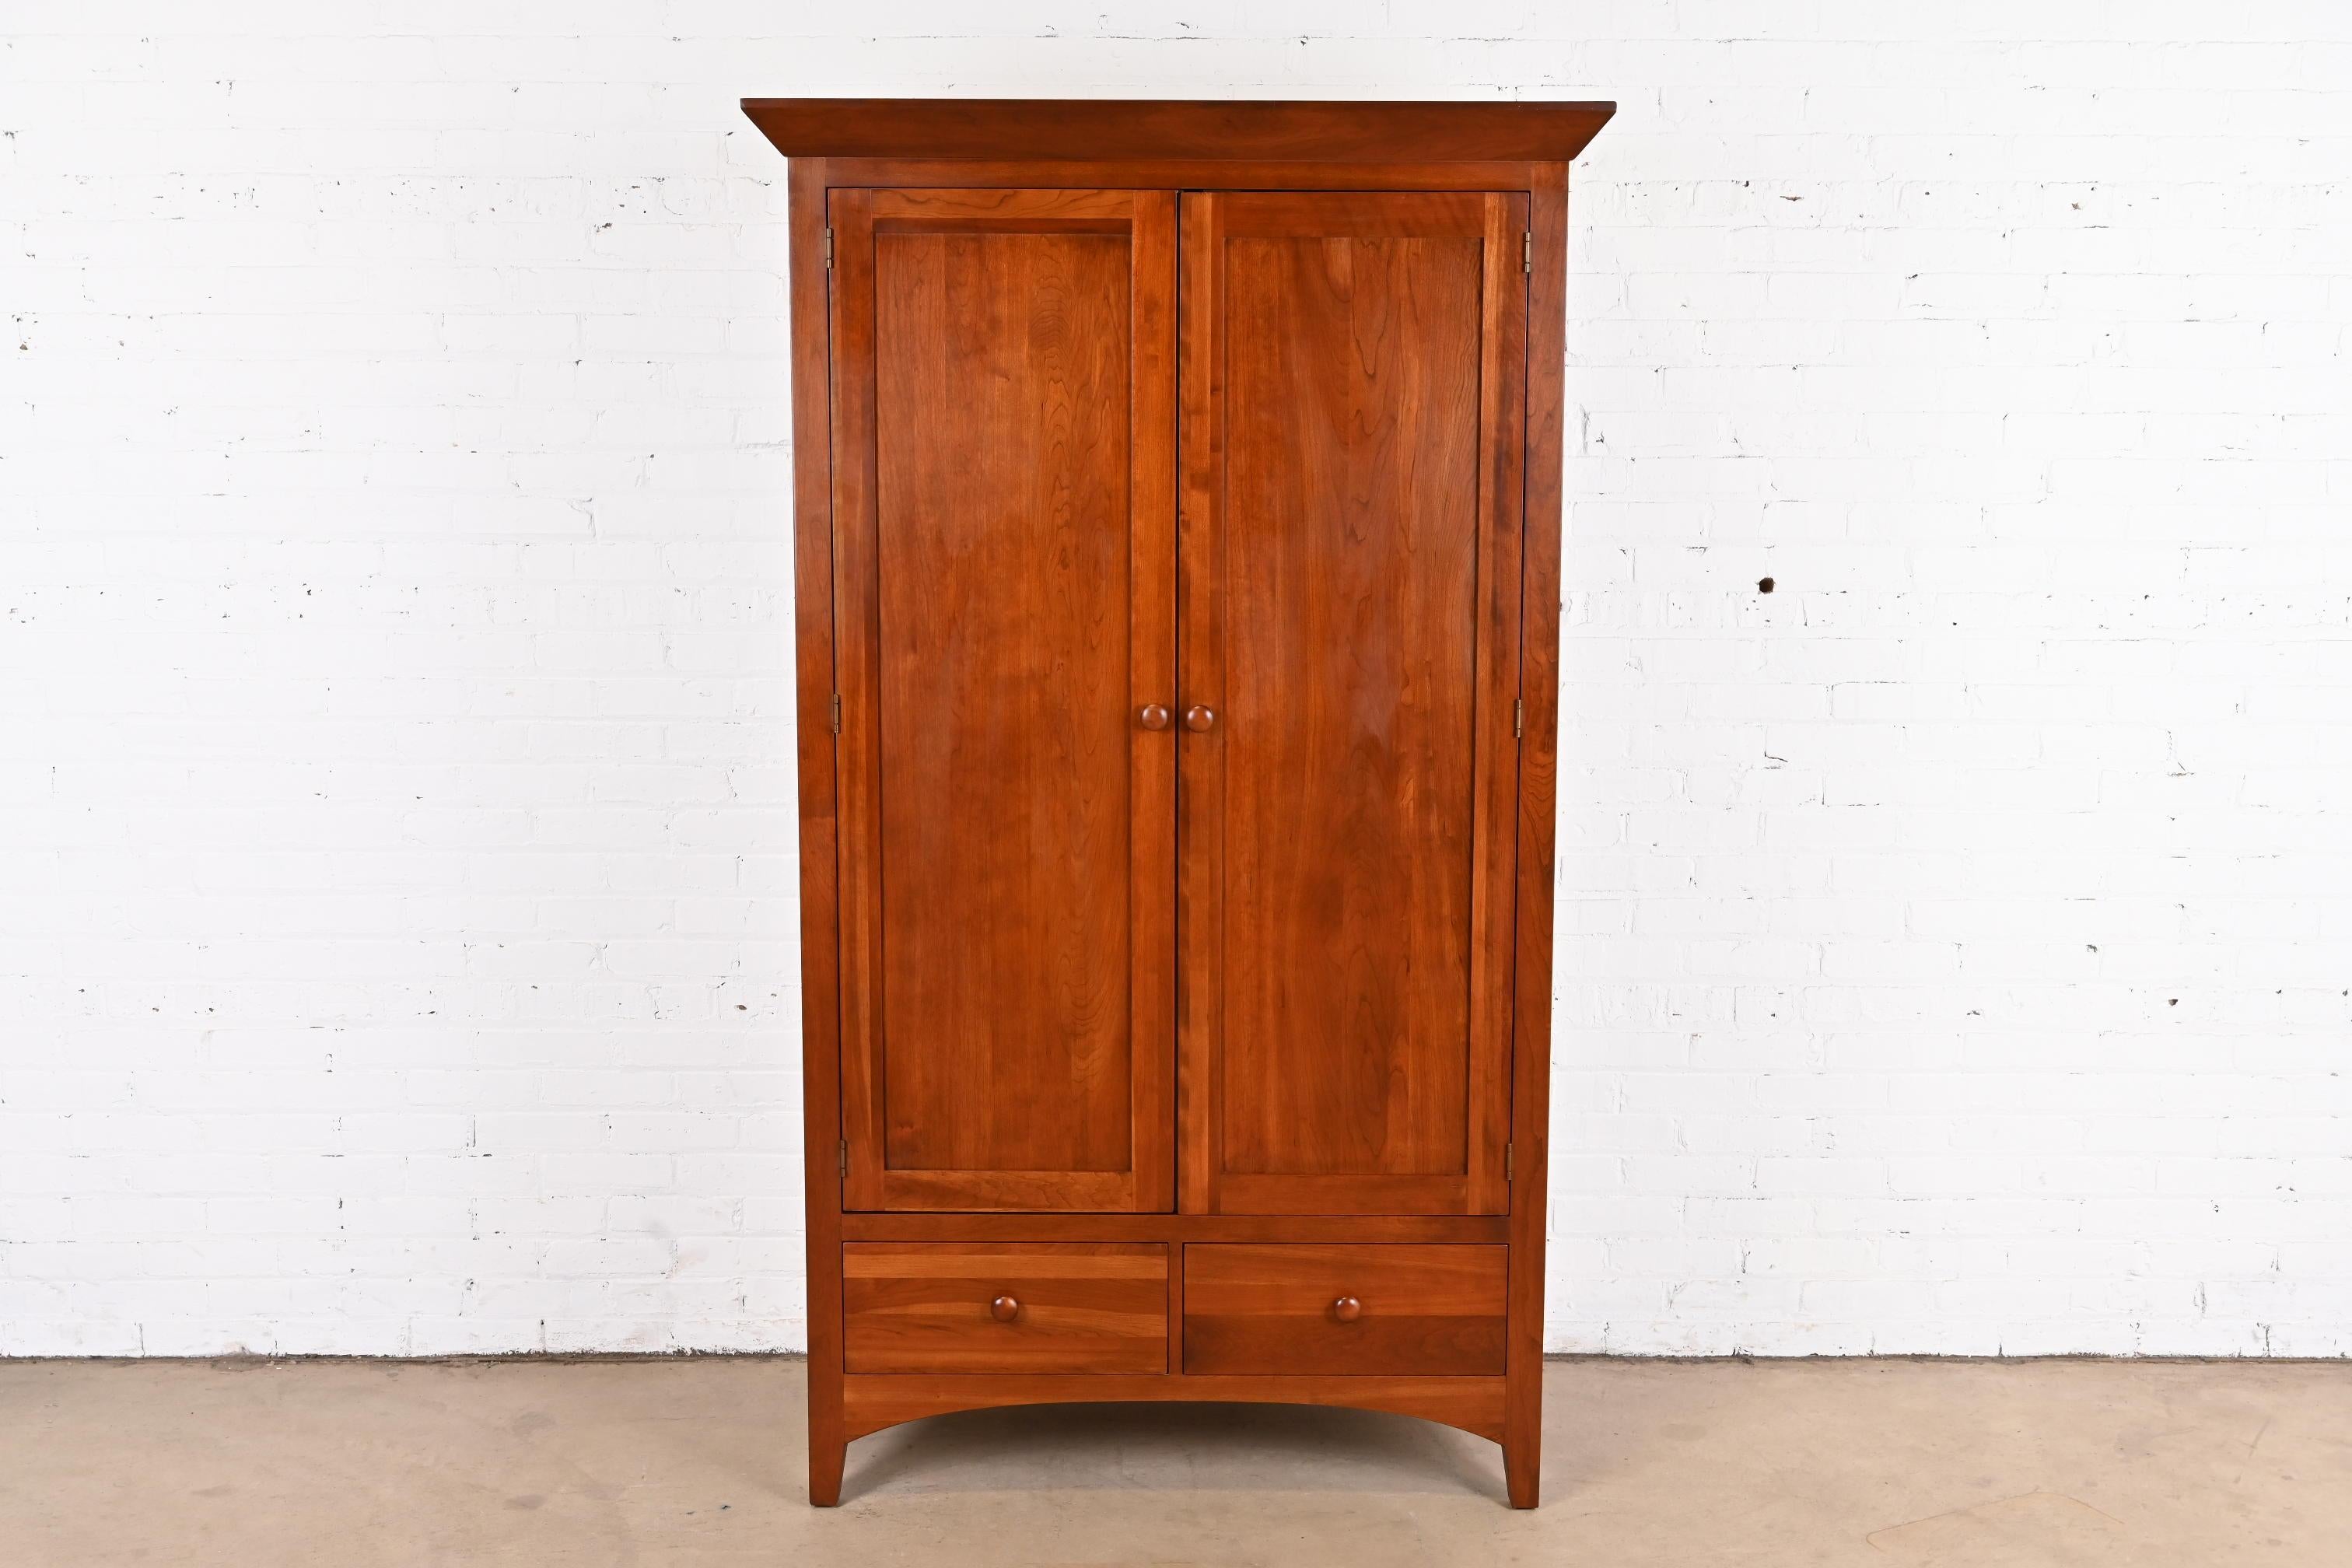 A gorgeous Mission, Arts & Crafts, or Shaker style solid cherry wood gentleman's chest or armoire dresser

USA, circa 1990s

Measures: 44